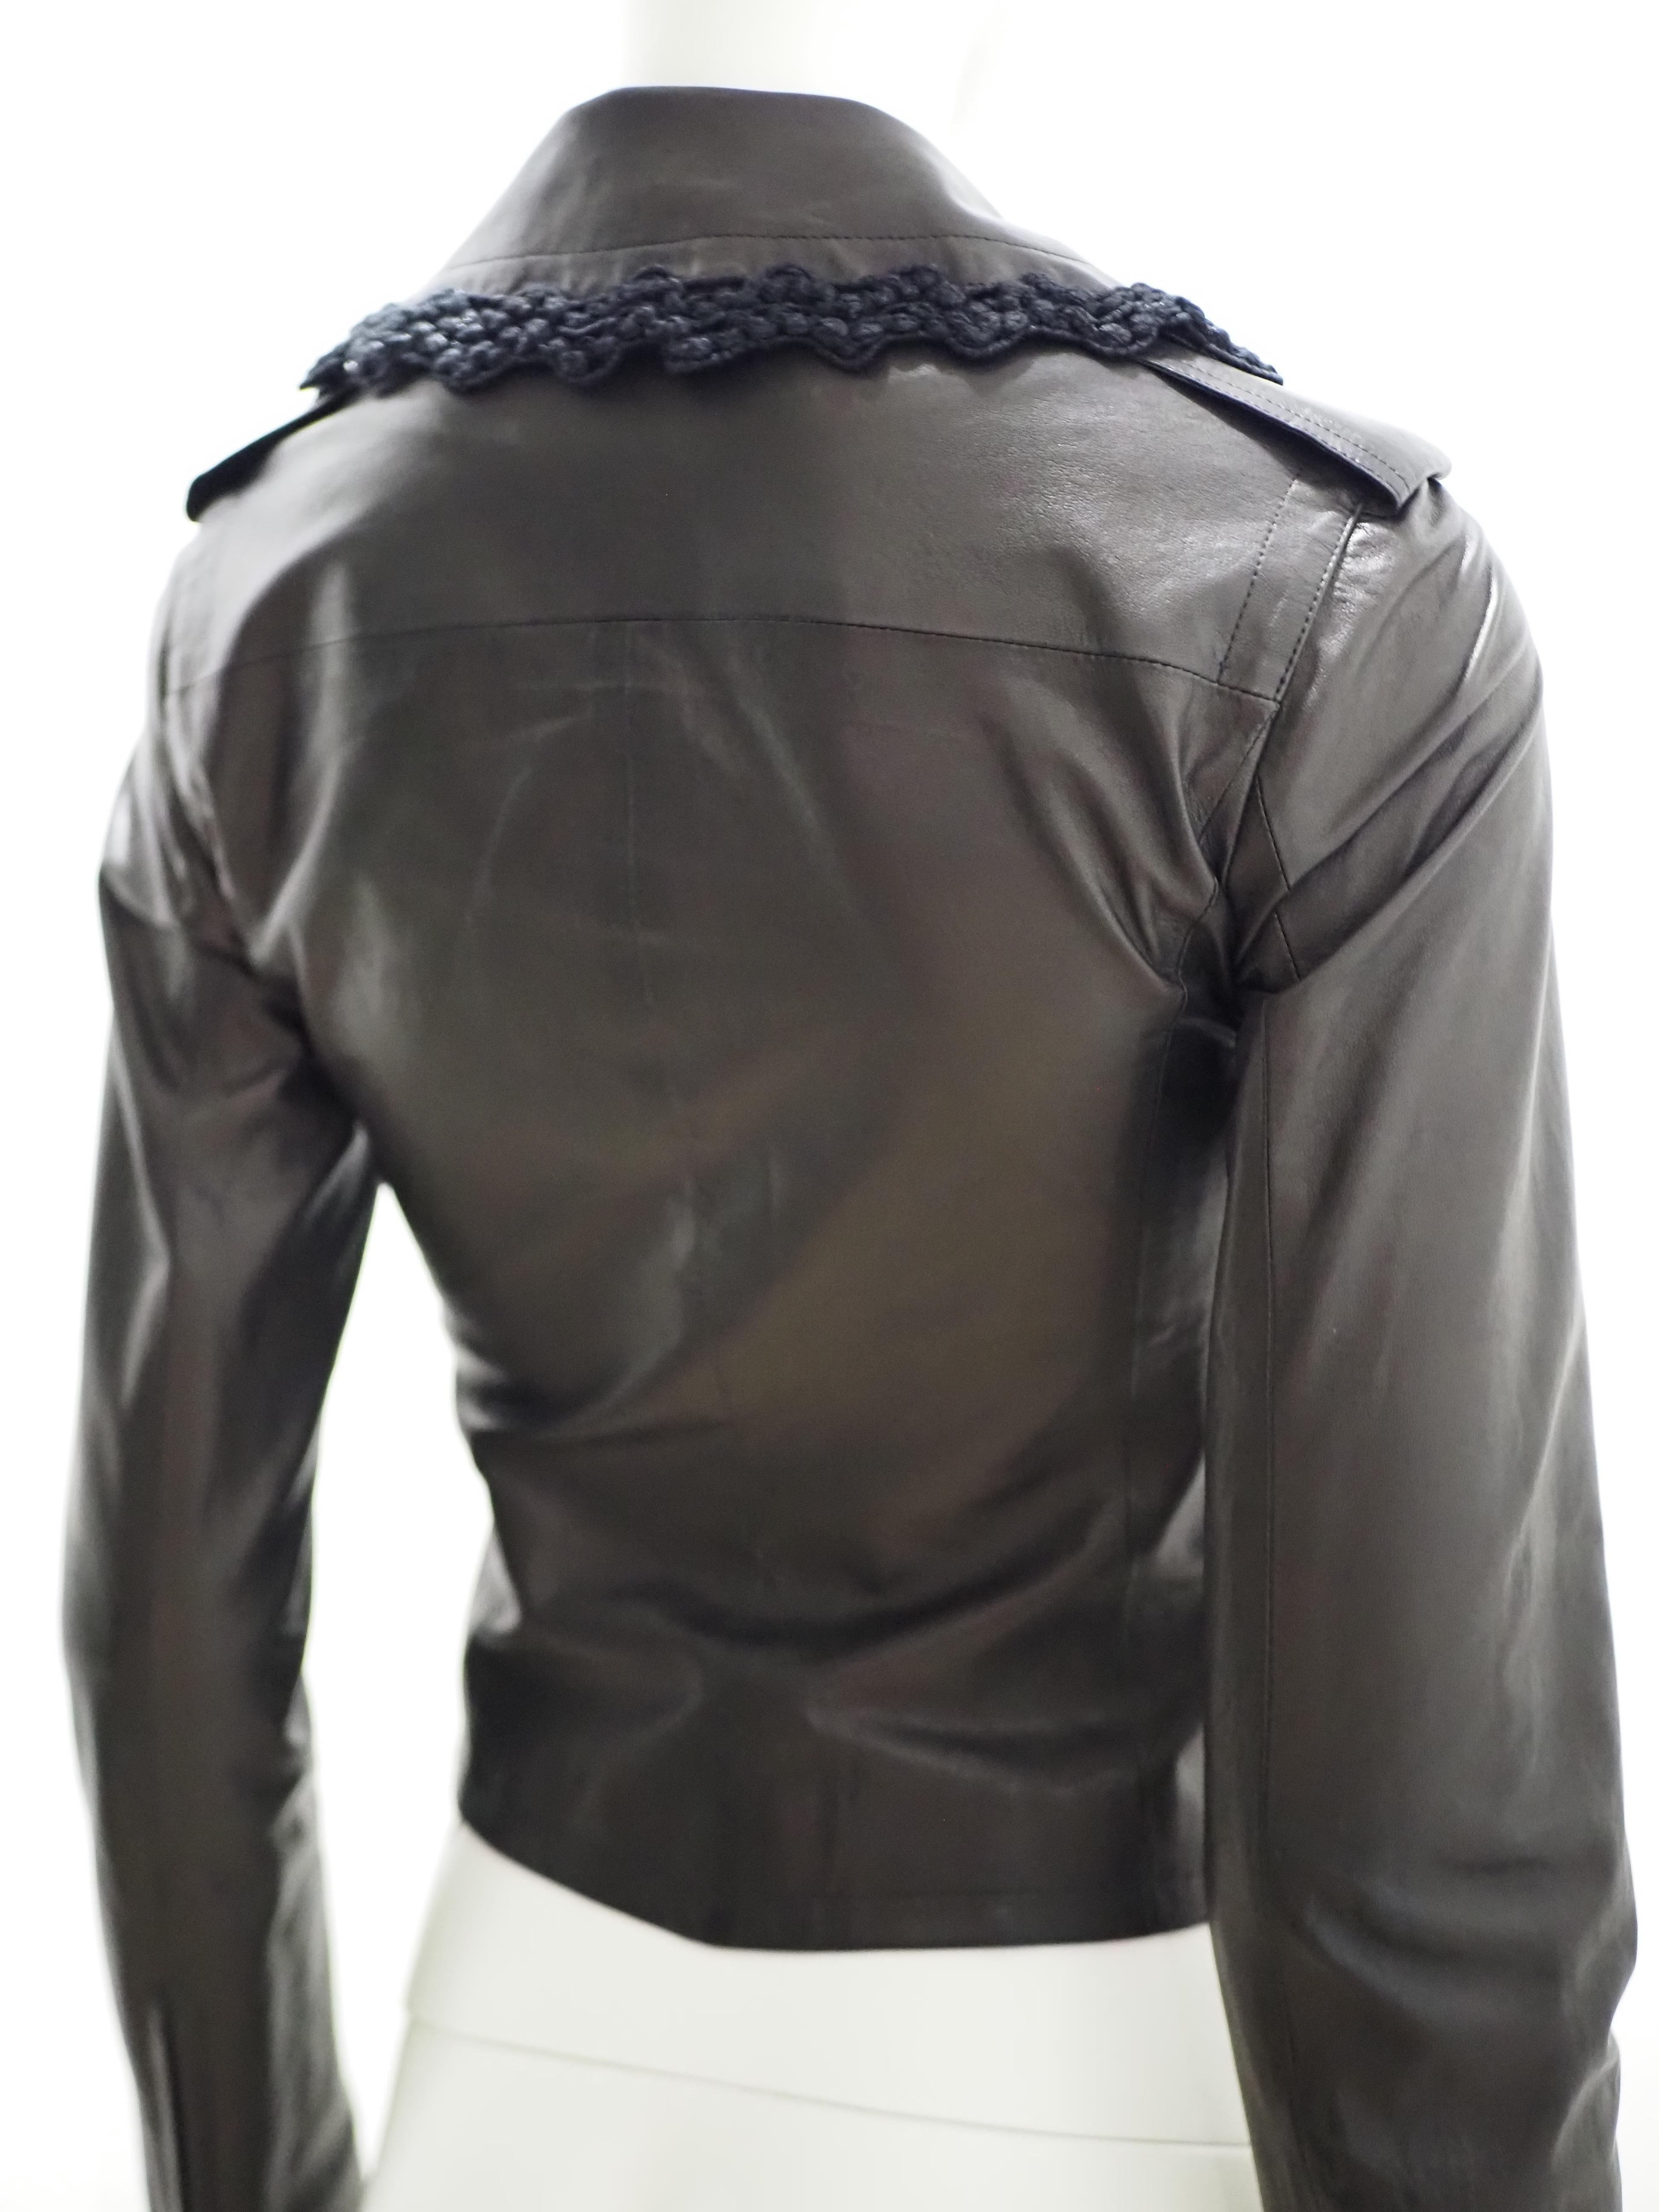 Chanel black leather jacket
lambskin jacket, with silk lining totally made in france in size FR 34, it 38